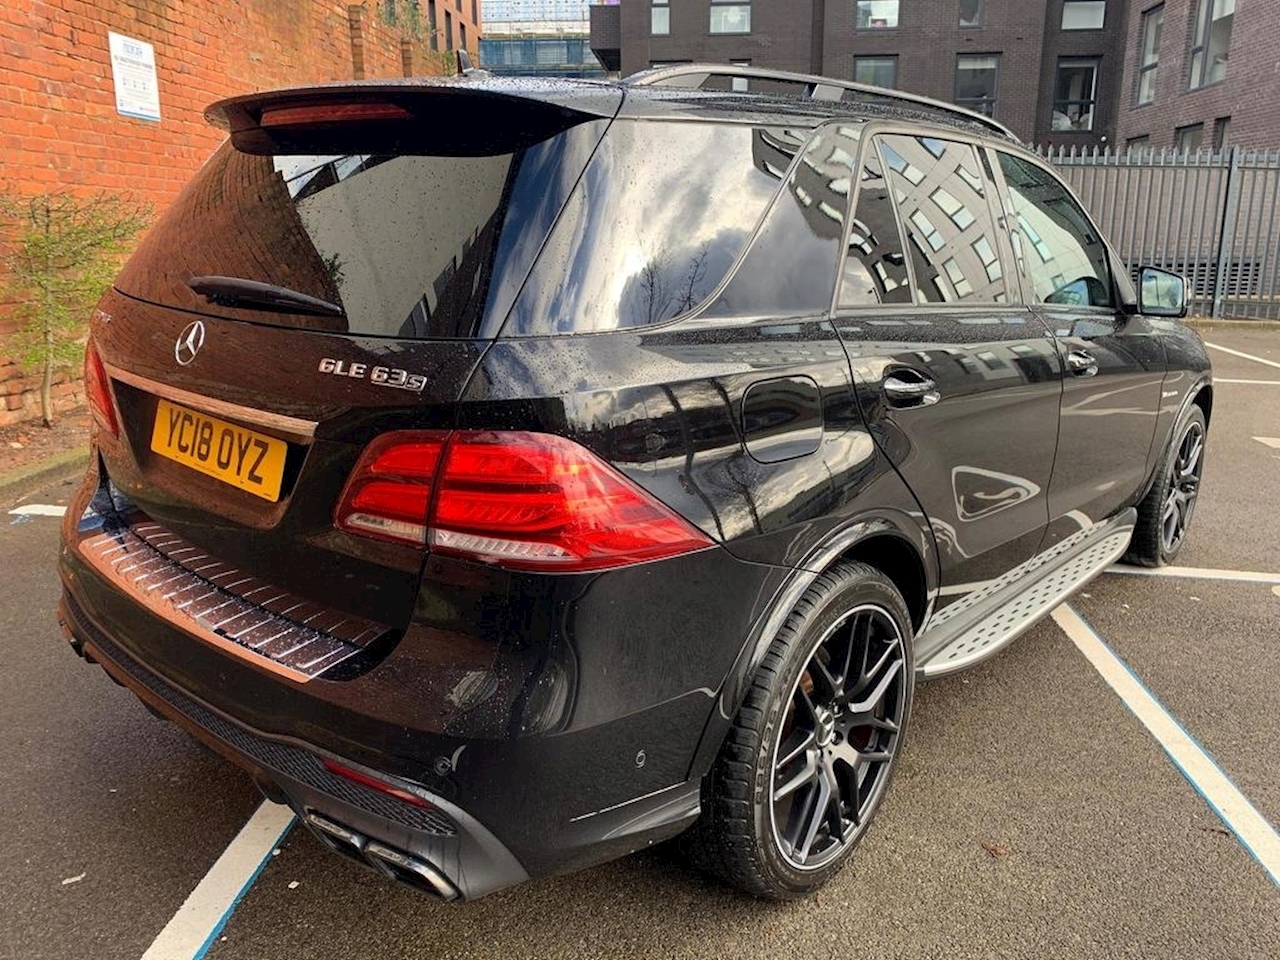 Used 18 Mercedes Gle Class Amg Gle 63 S 4matic Night Edition Estate 5 5 Automatic Petrol For Sale In Altrincham Smartfish Group Ltd T A Albion Car Sales